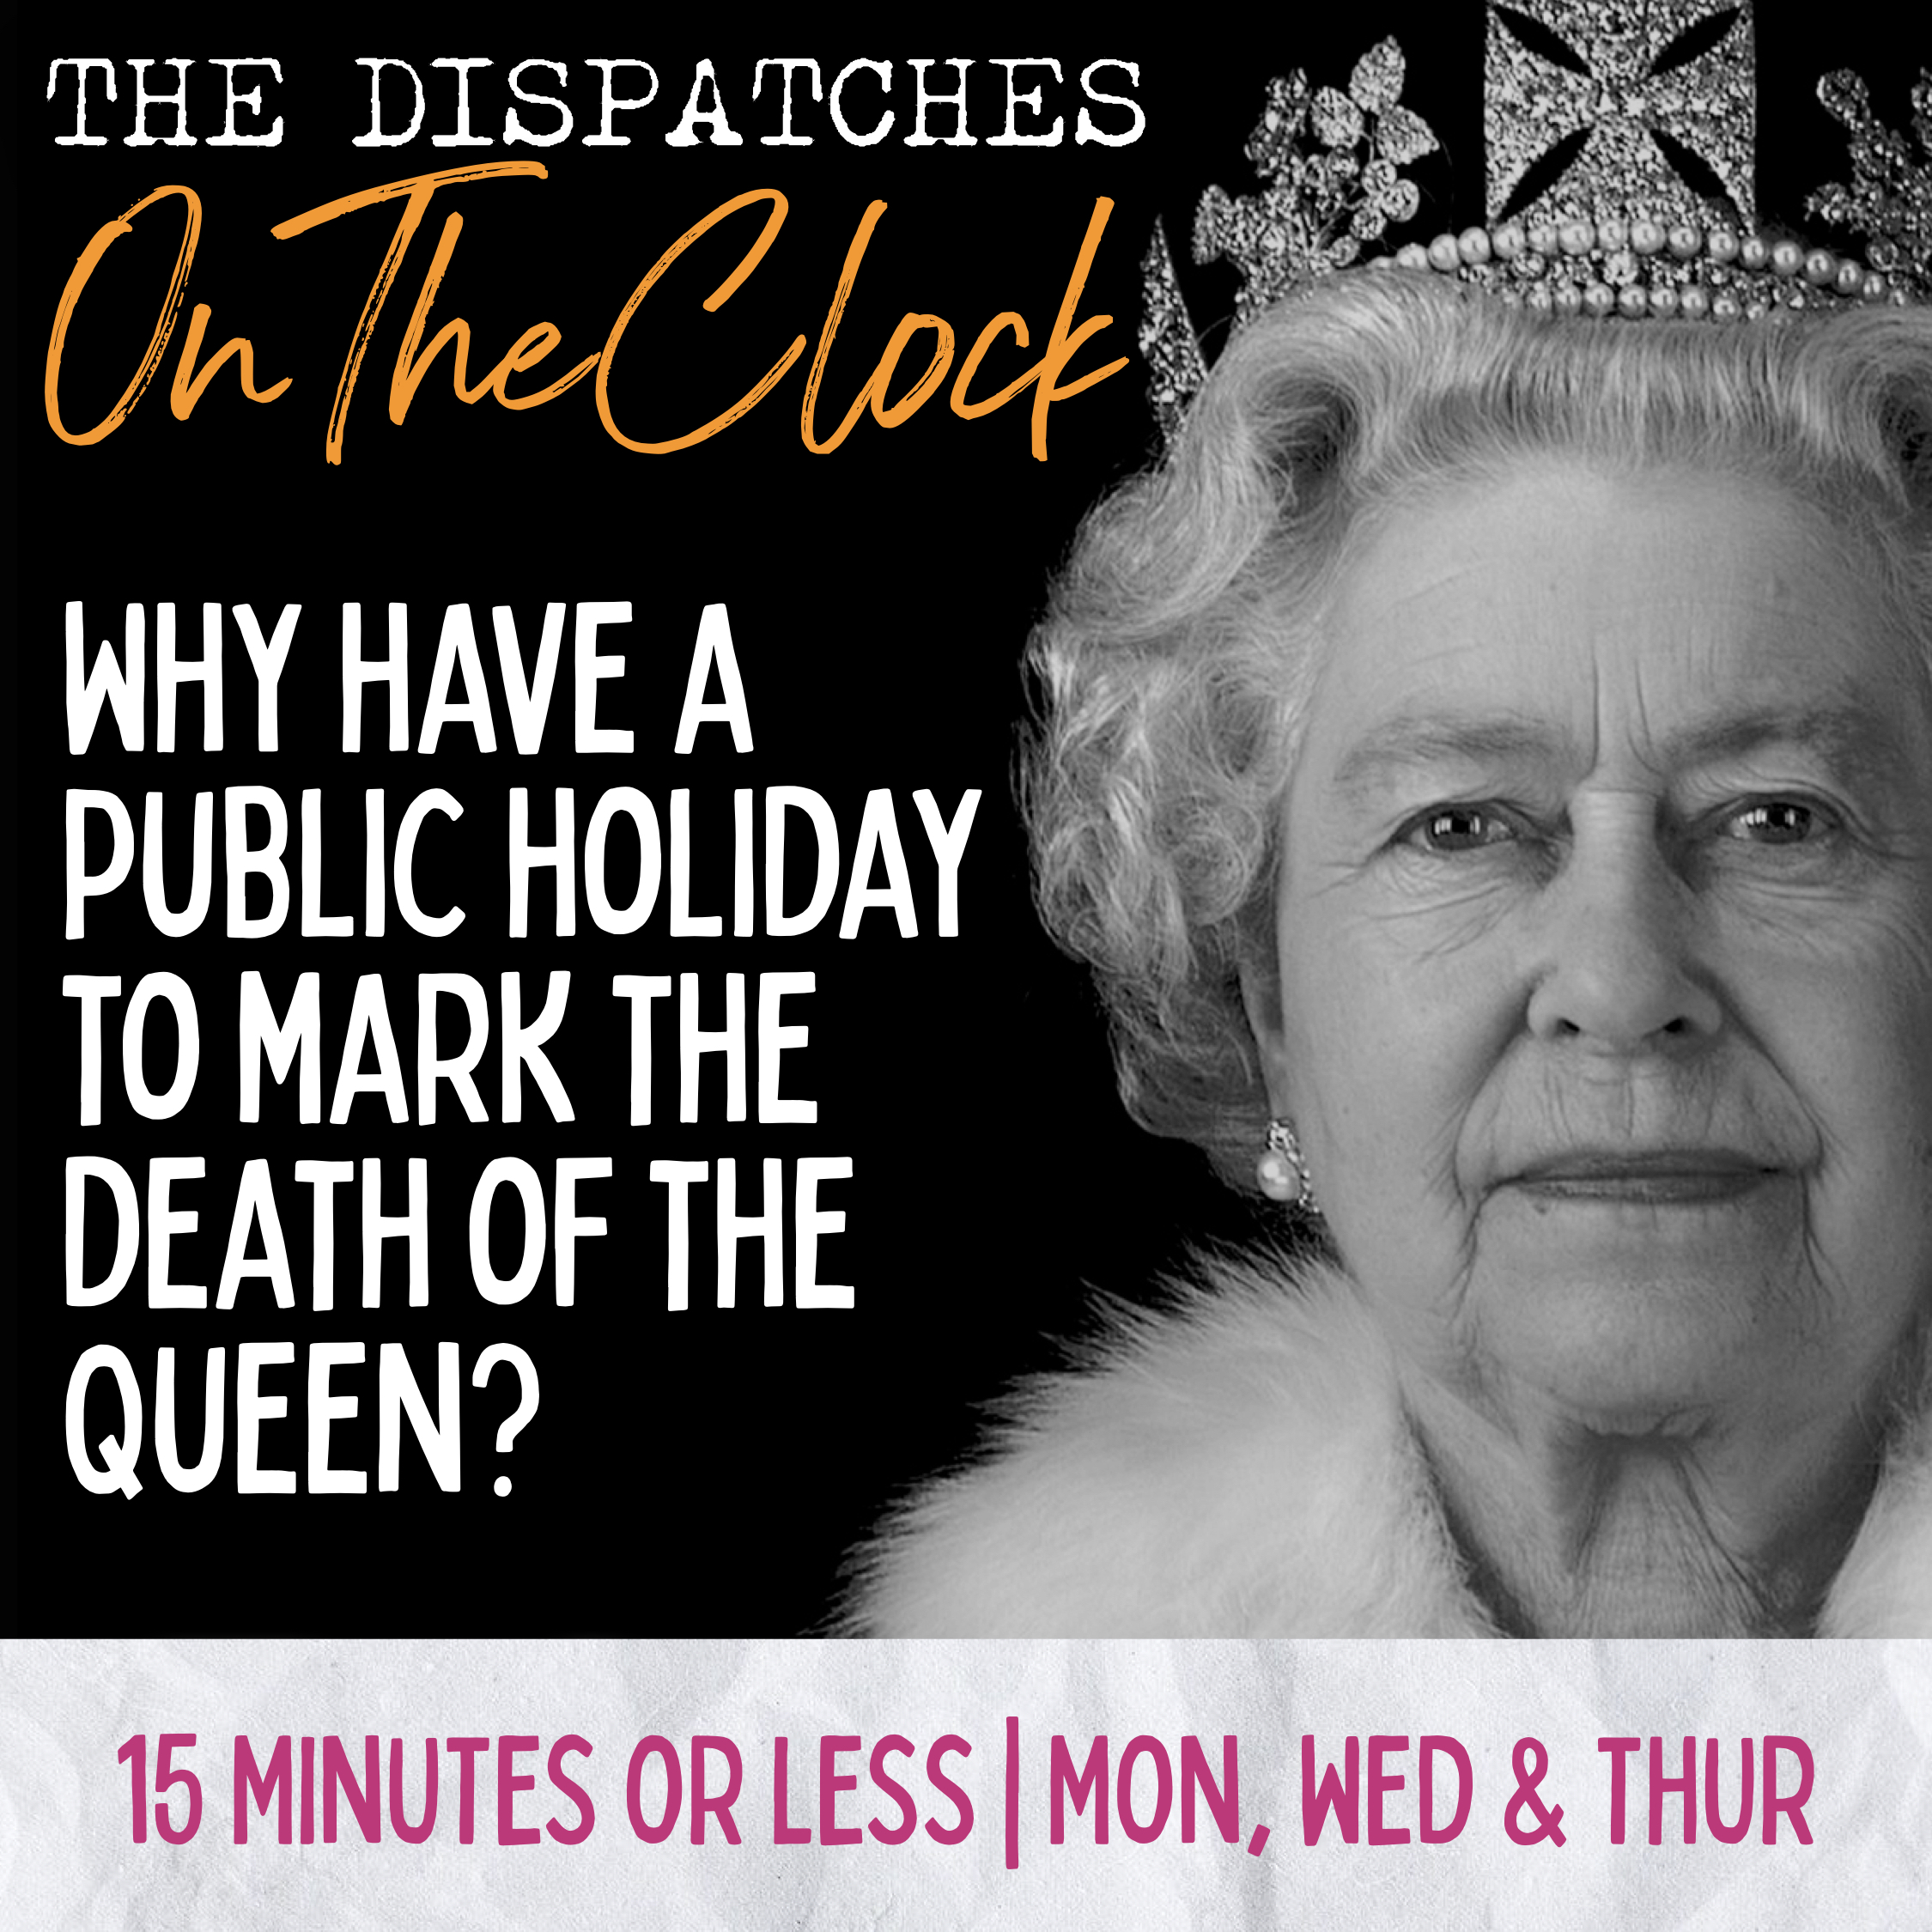 ON THE CLOCK | Why Have a Public Holiday to Mark the Death of the Queen?